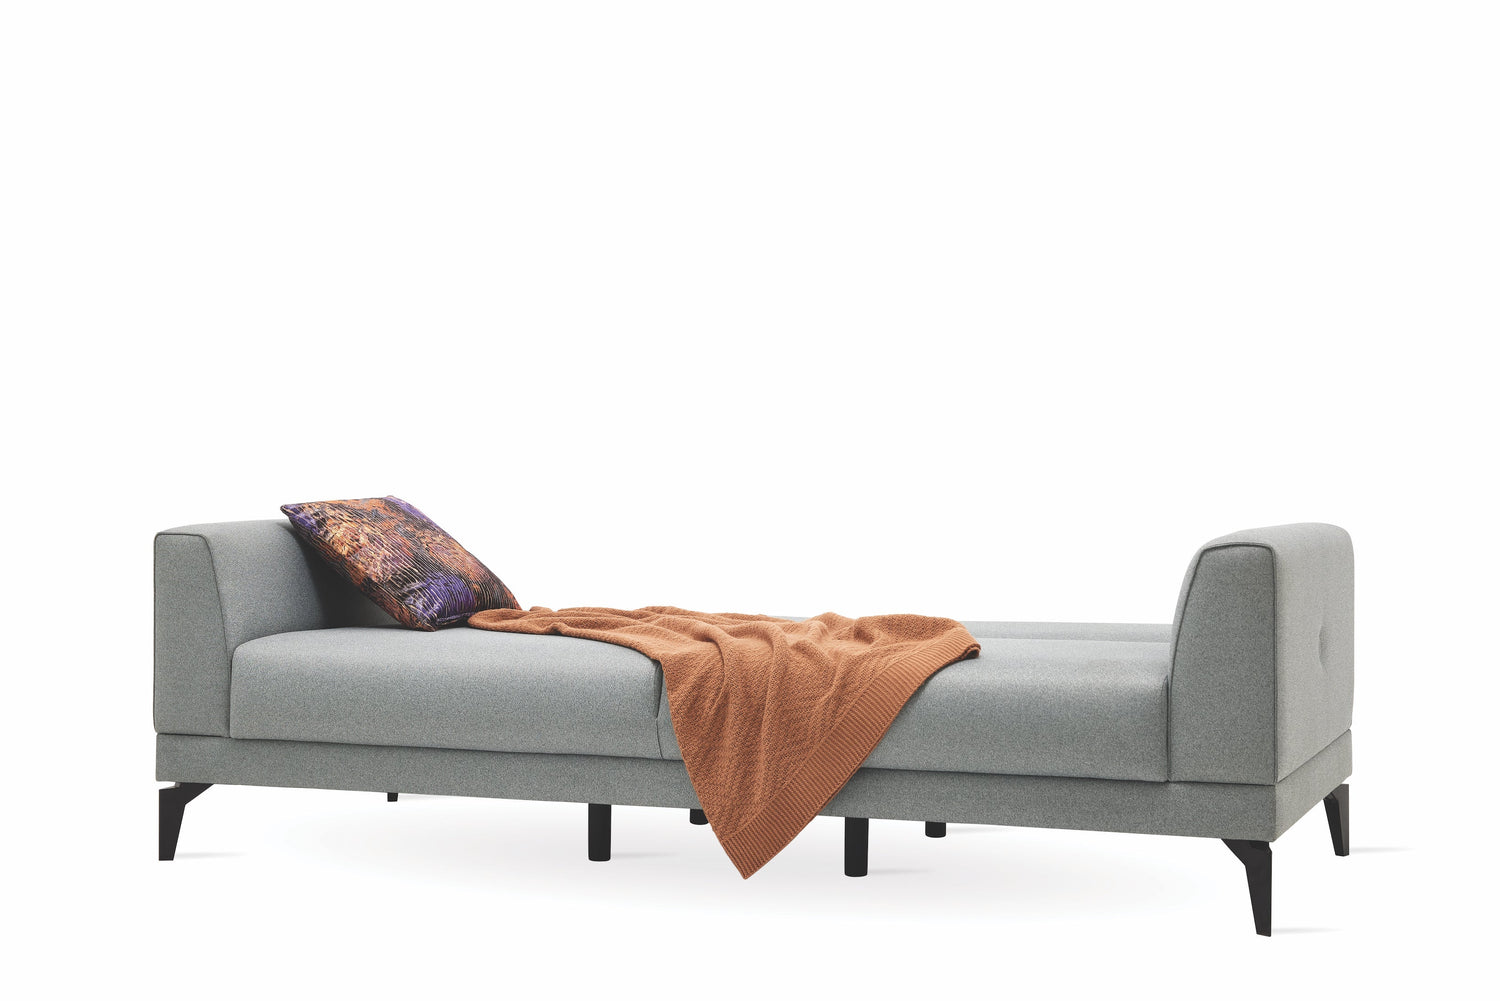 Cordell Light Gray 3-Seater Sofa Bed - CORDELL 03.302 .0515.5559.0057.0000.21.06